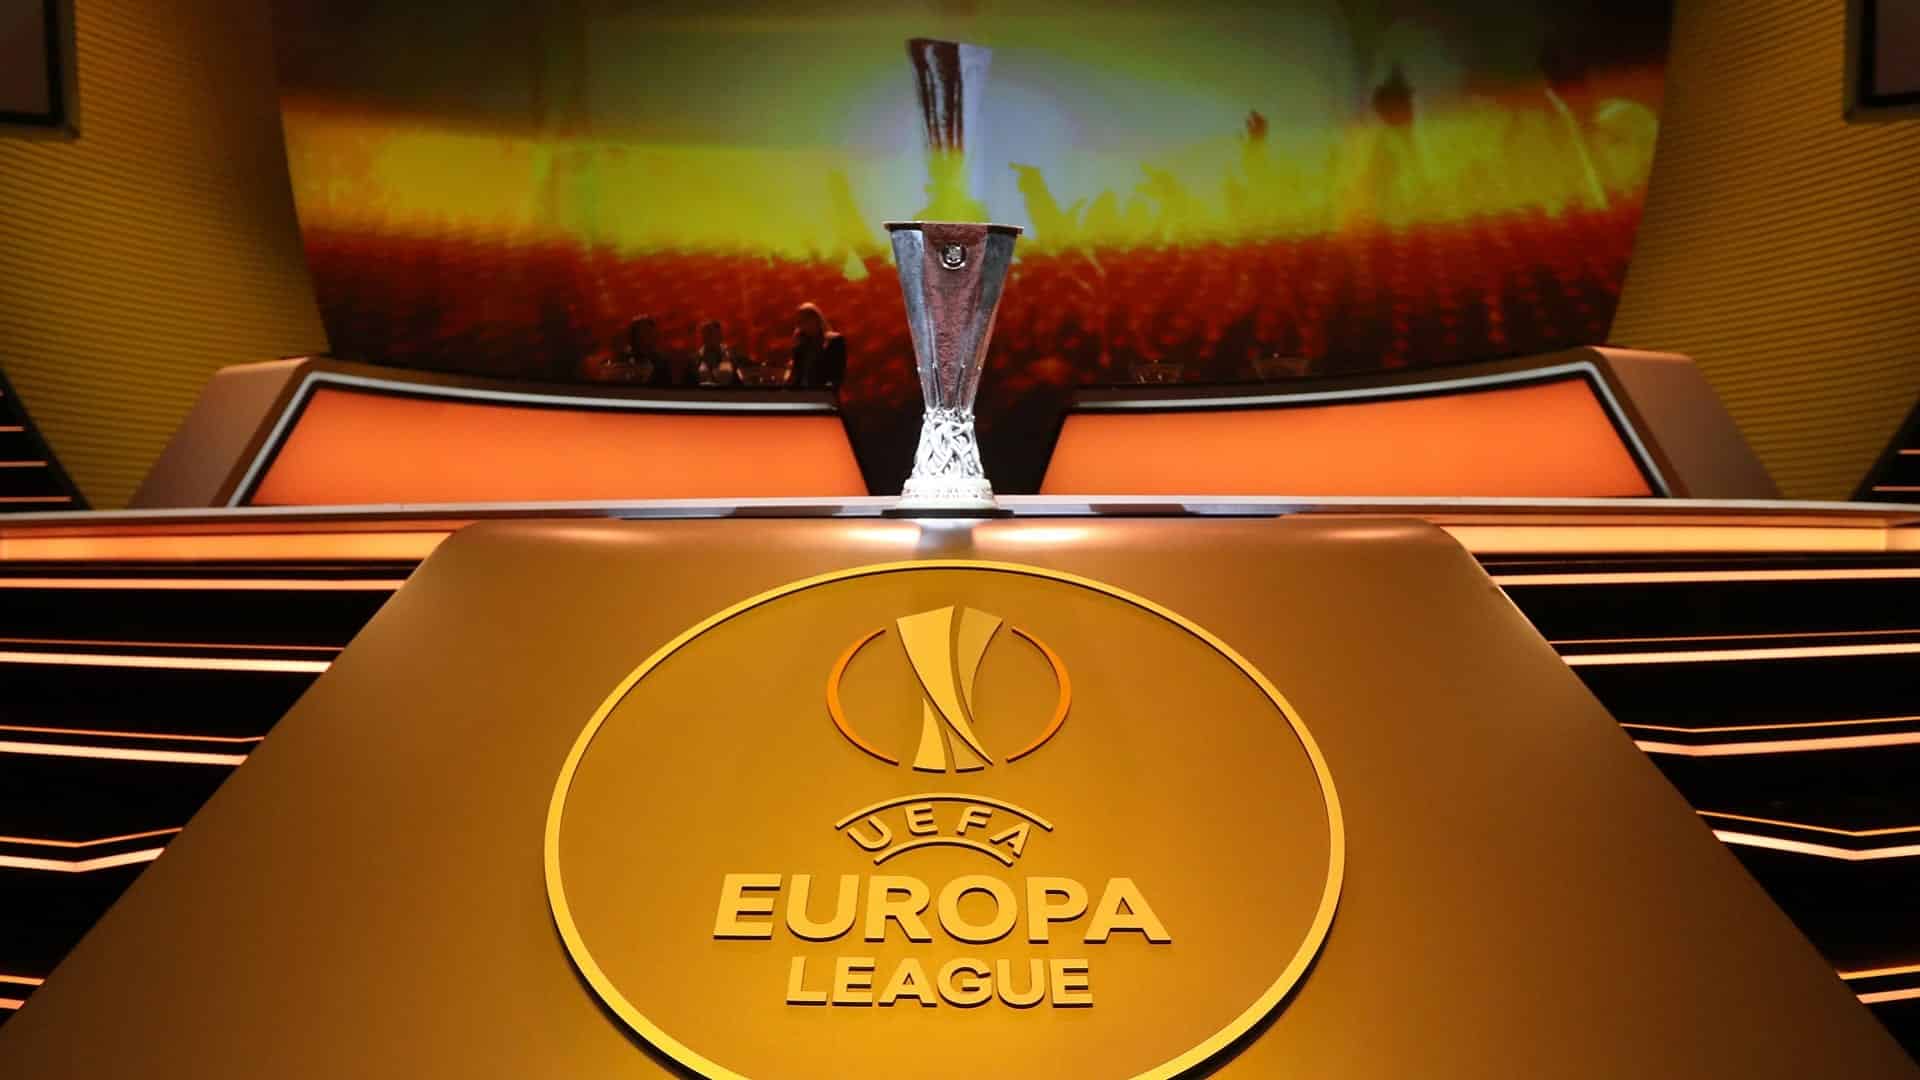 You are currently viewing Man United to face Real Sociedad in Europa League, Arsenal draw PSV